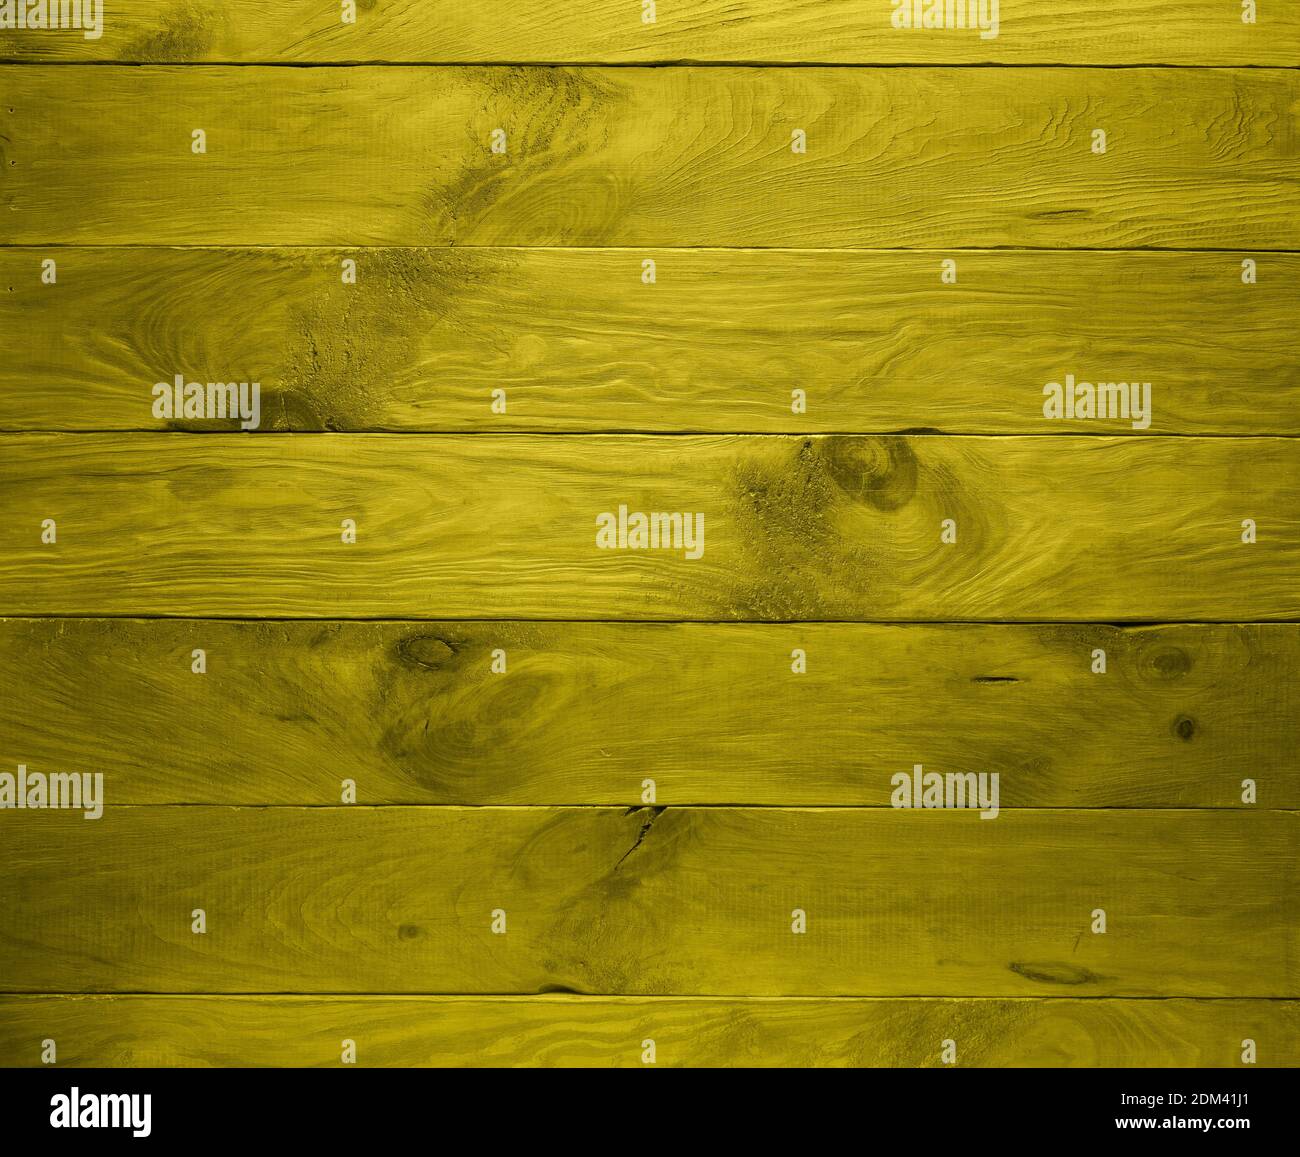 Natural pine wood planks toned in illuminating yellow, color of 2021 year. Background with horizontal layout. View from directly above. Full frame wit Stock Photo